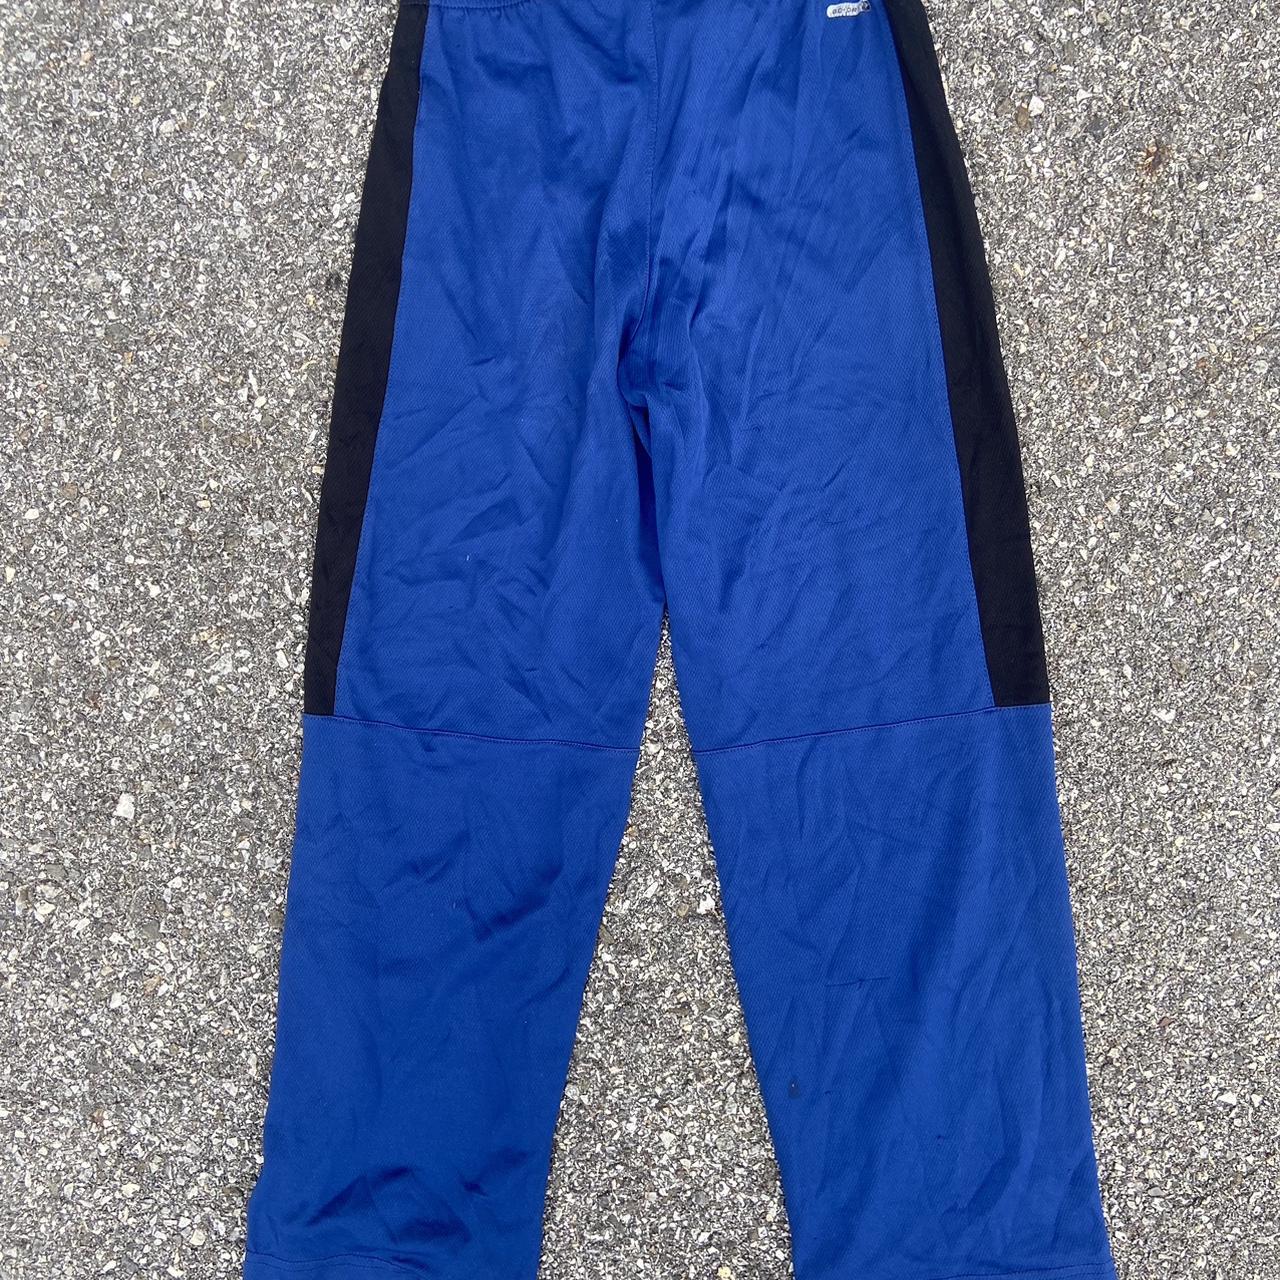 Vintage 80s Holloway track pants insulated blue - Depop